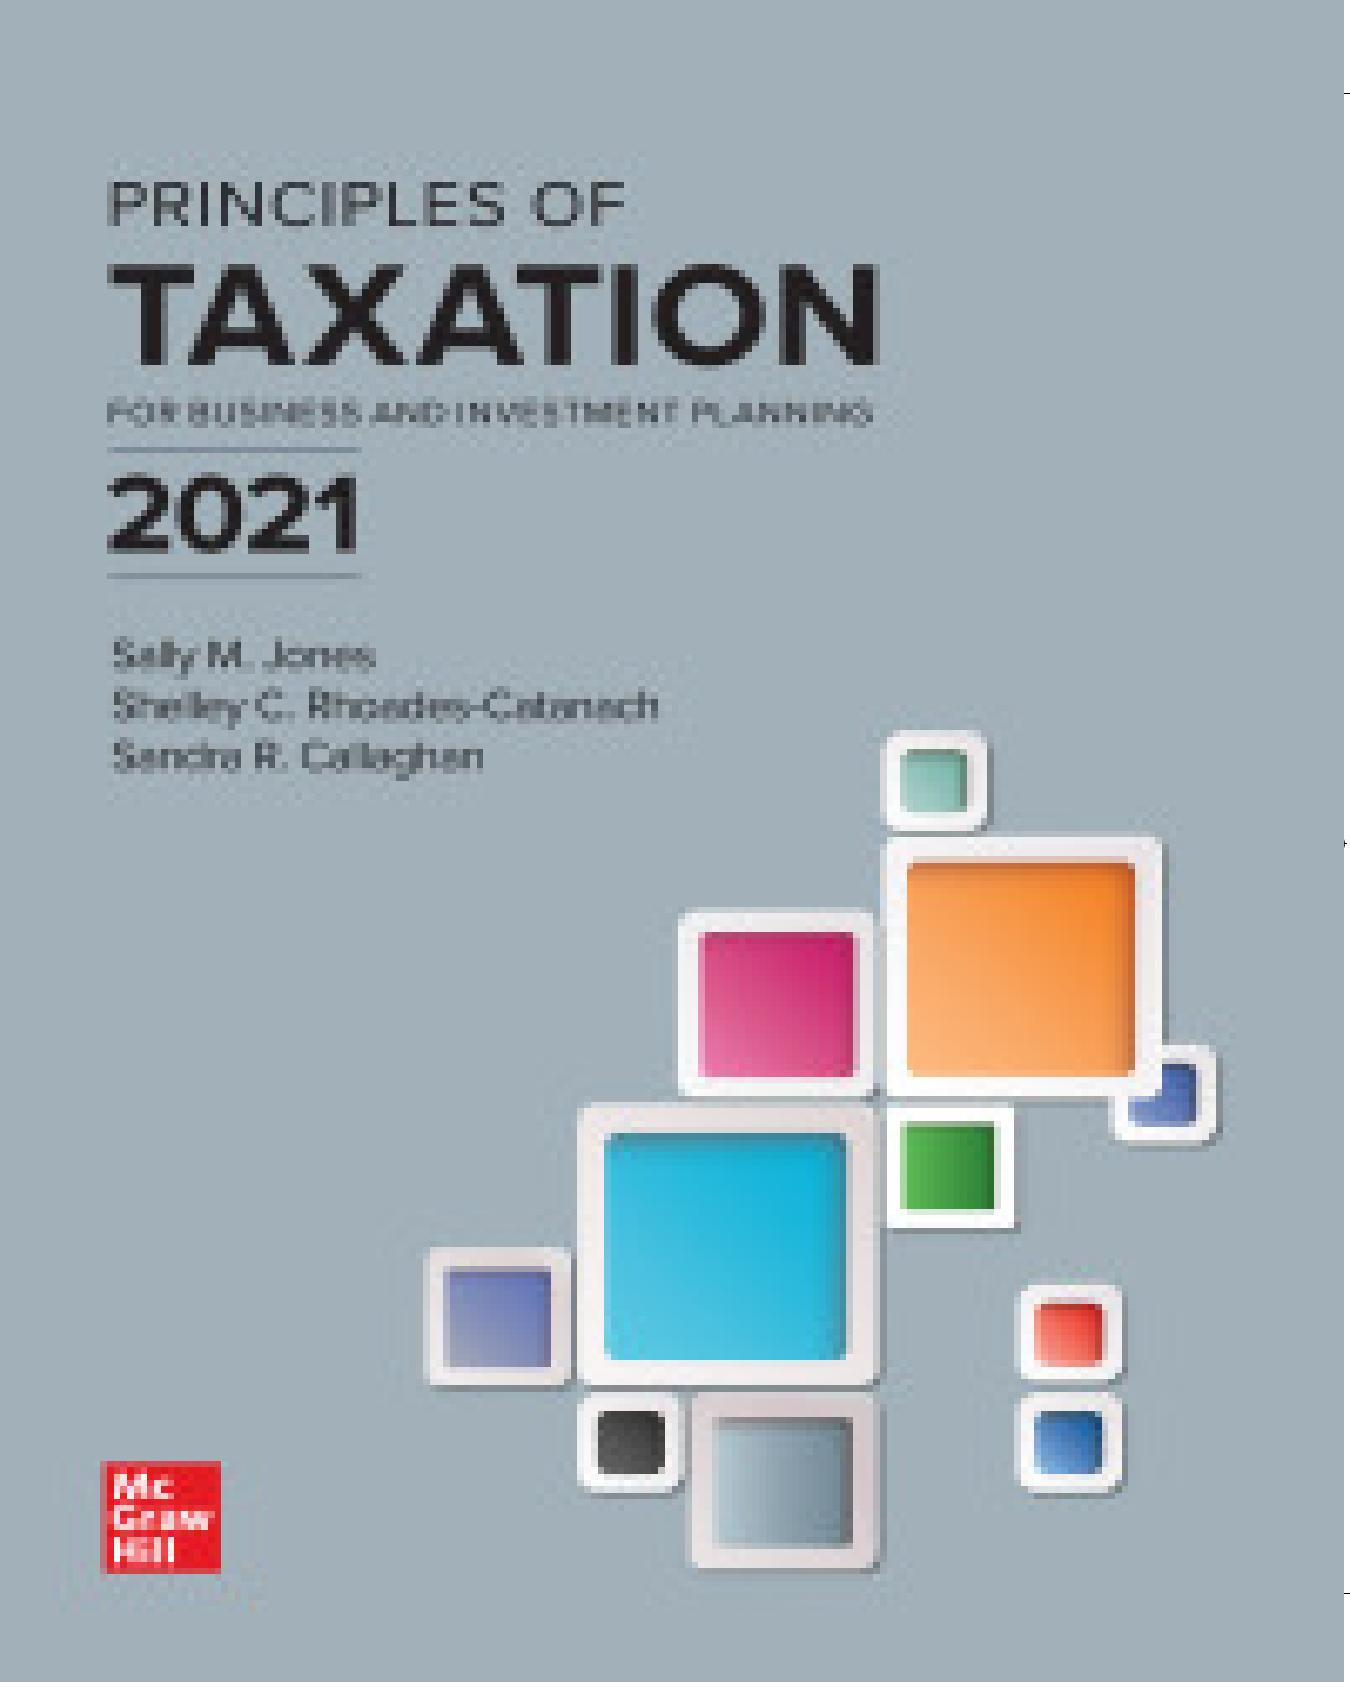 (eBook PDF)Principles of Taxation for Business and Investment Planning 2021 Edition 24th Edition by Sally Jones,Shelley Rhoades-Catanach